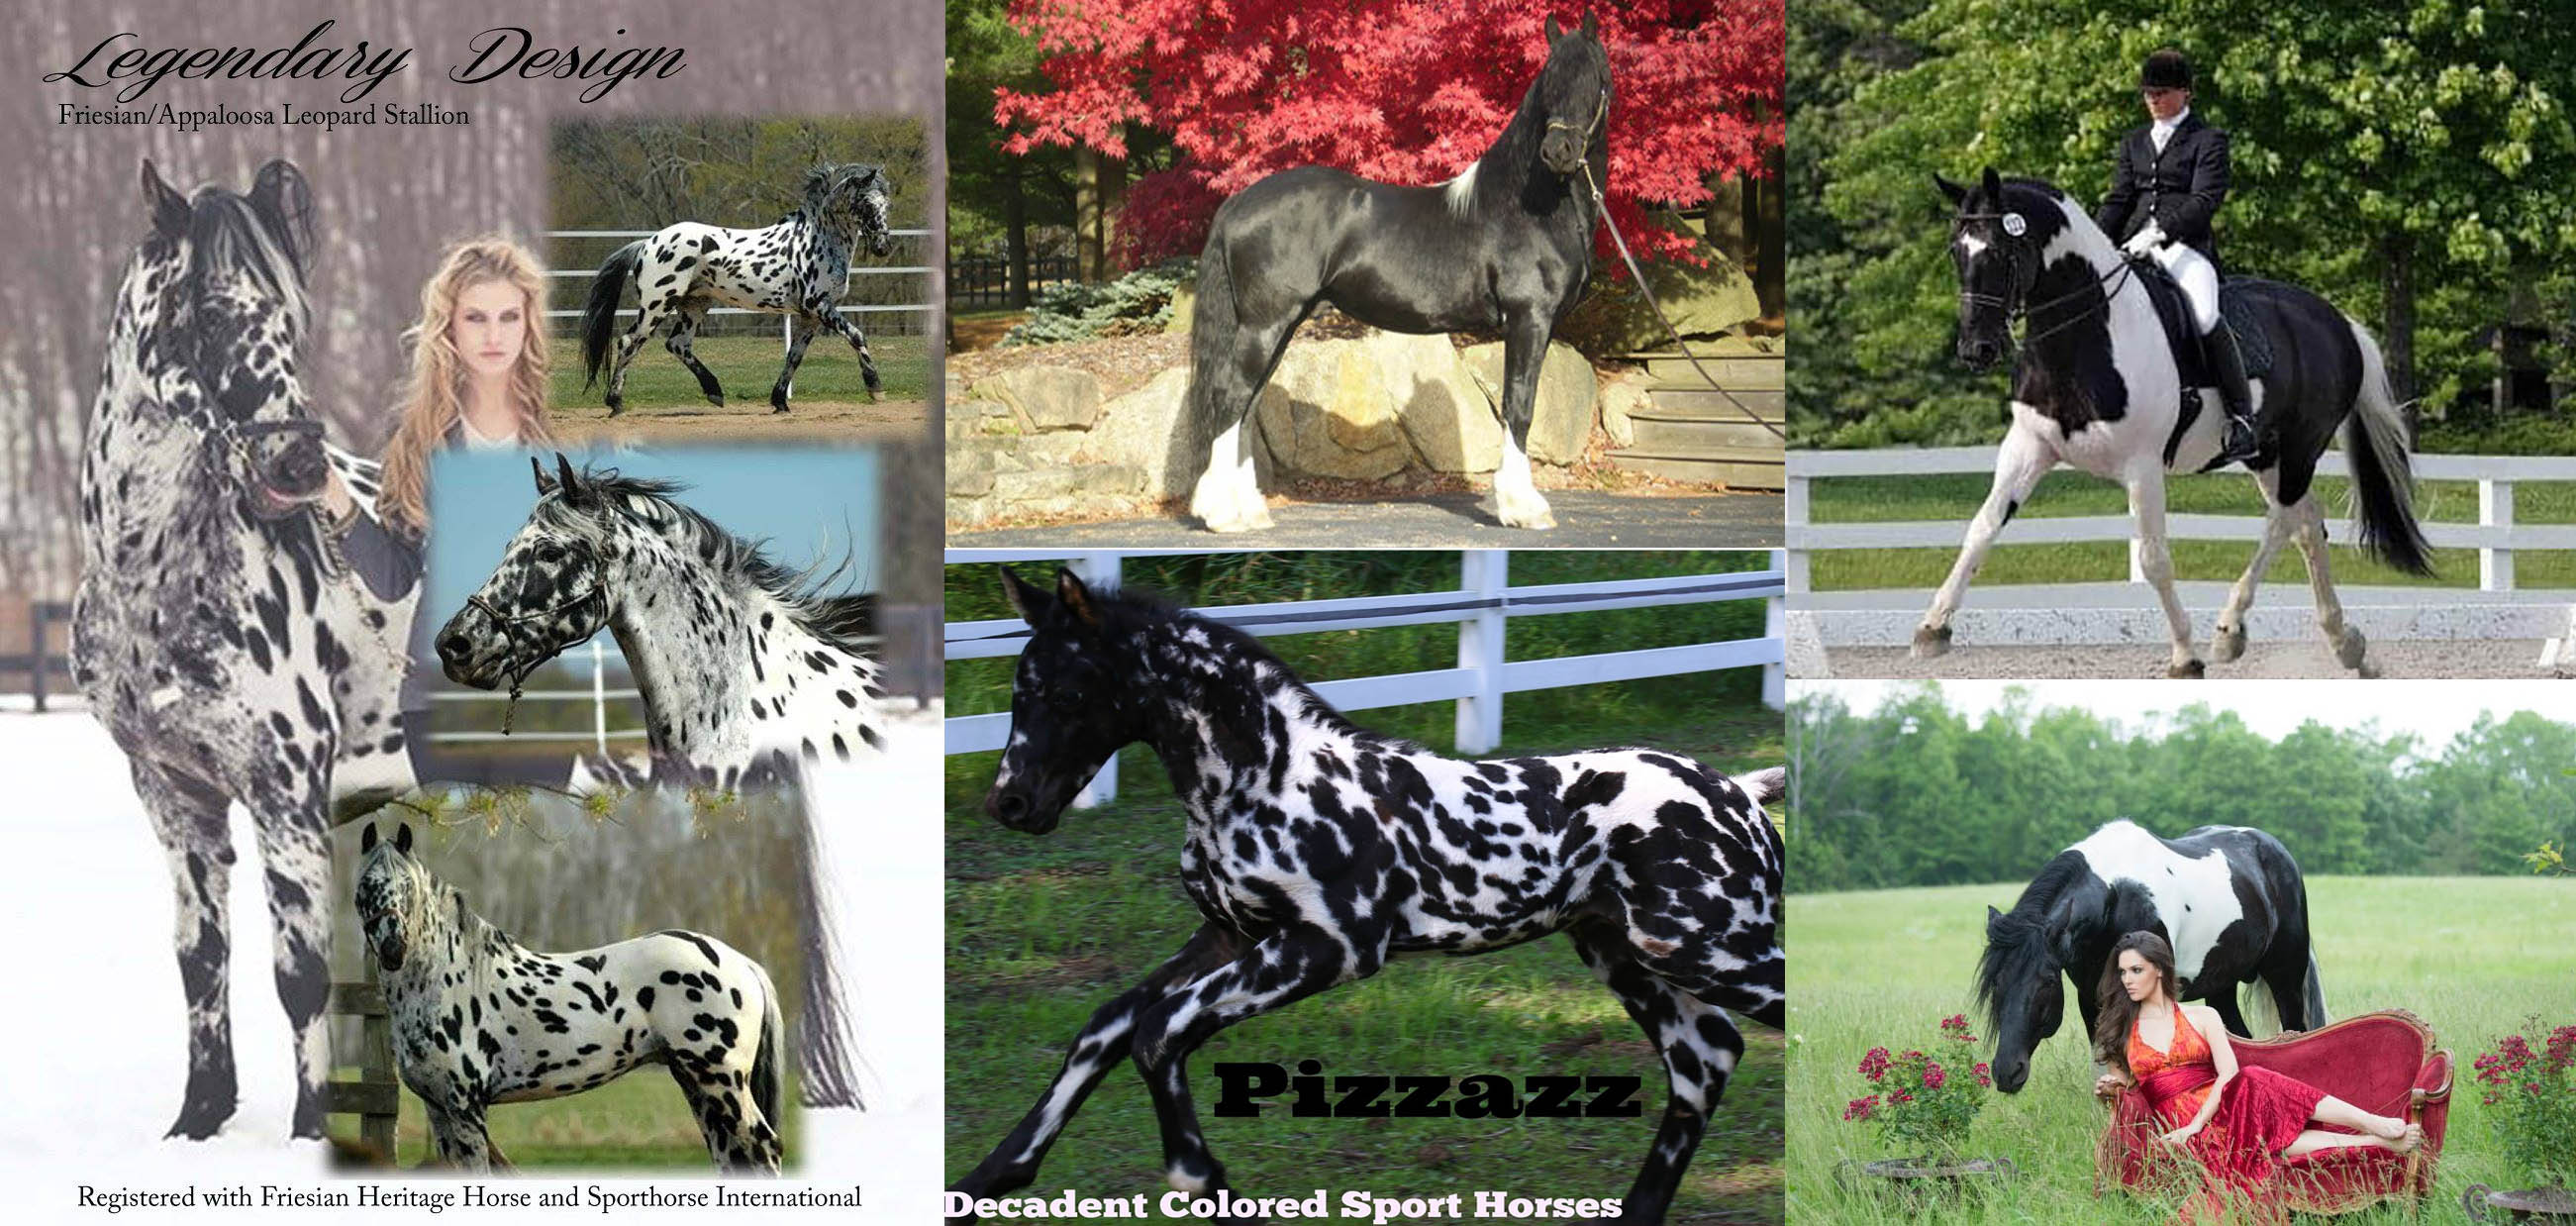 Decadent Colored Sport Horses - New Jersey, USA